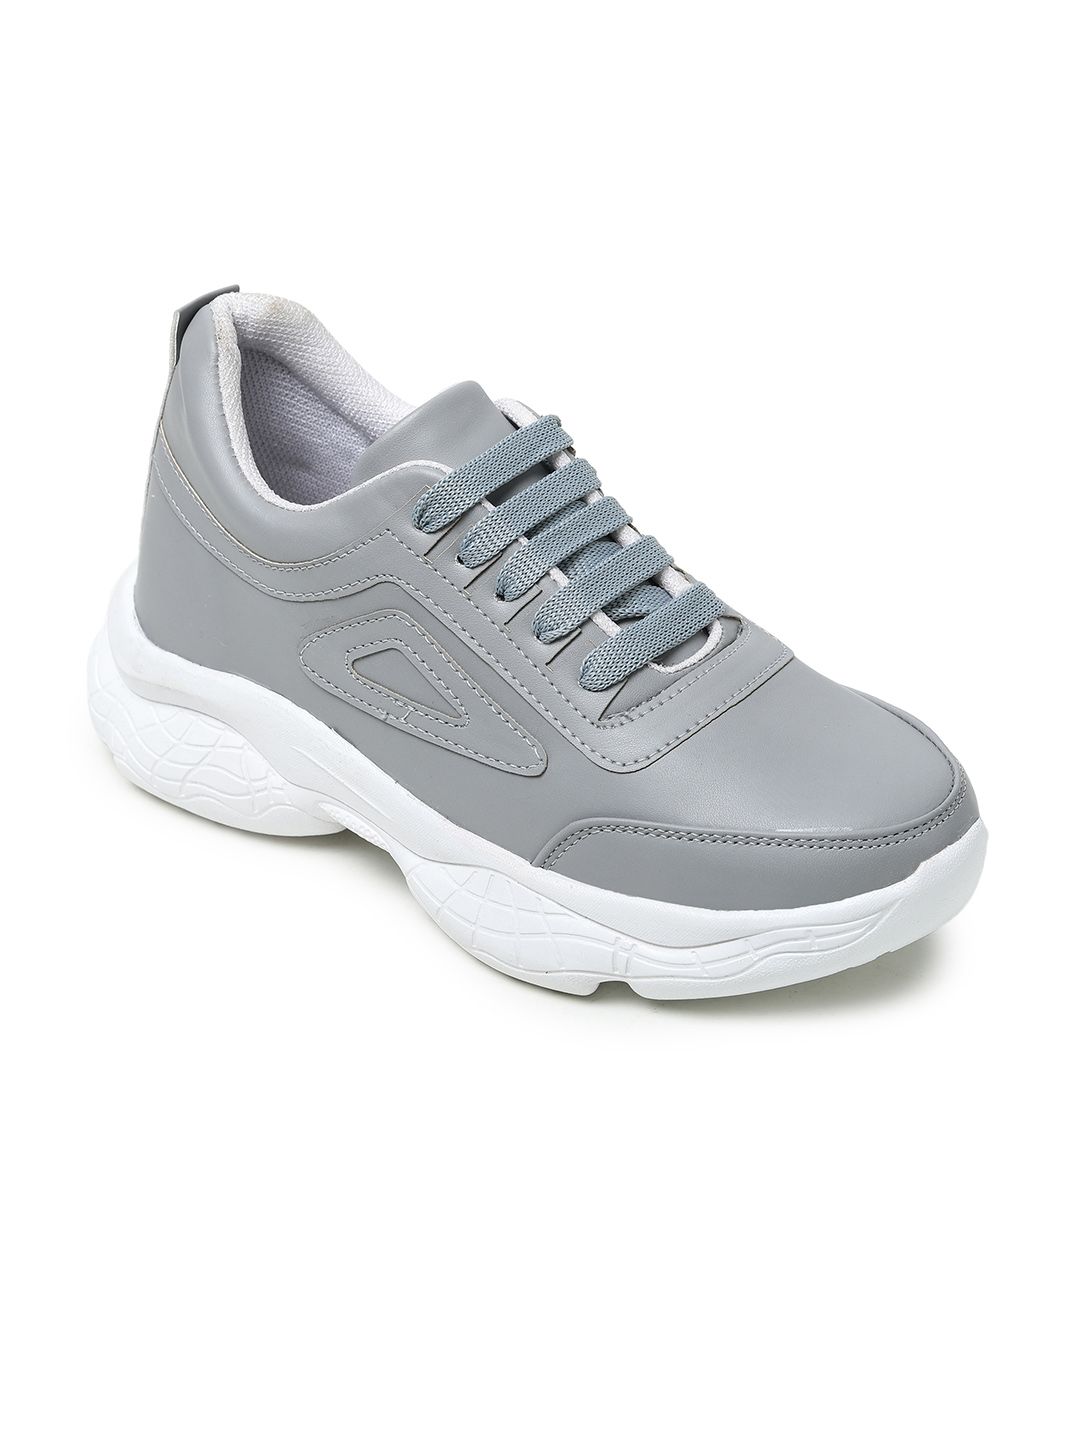 BOOTCO Women Grey Solid Sneakers Price in India